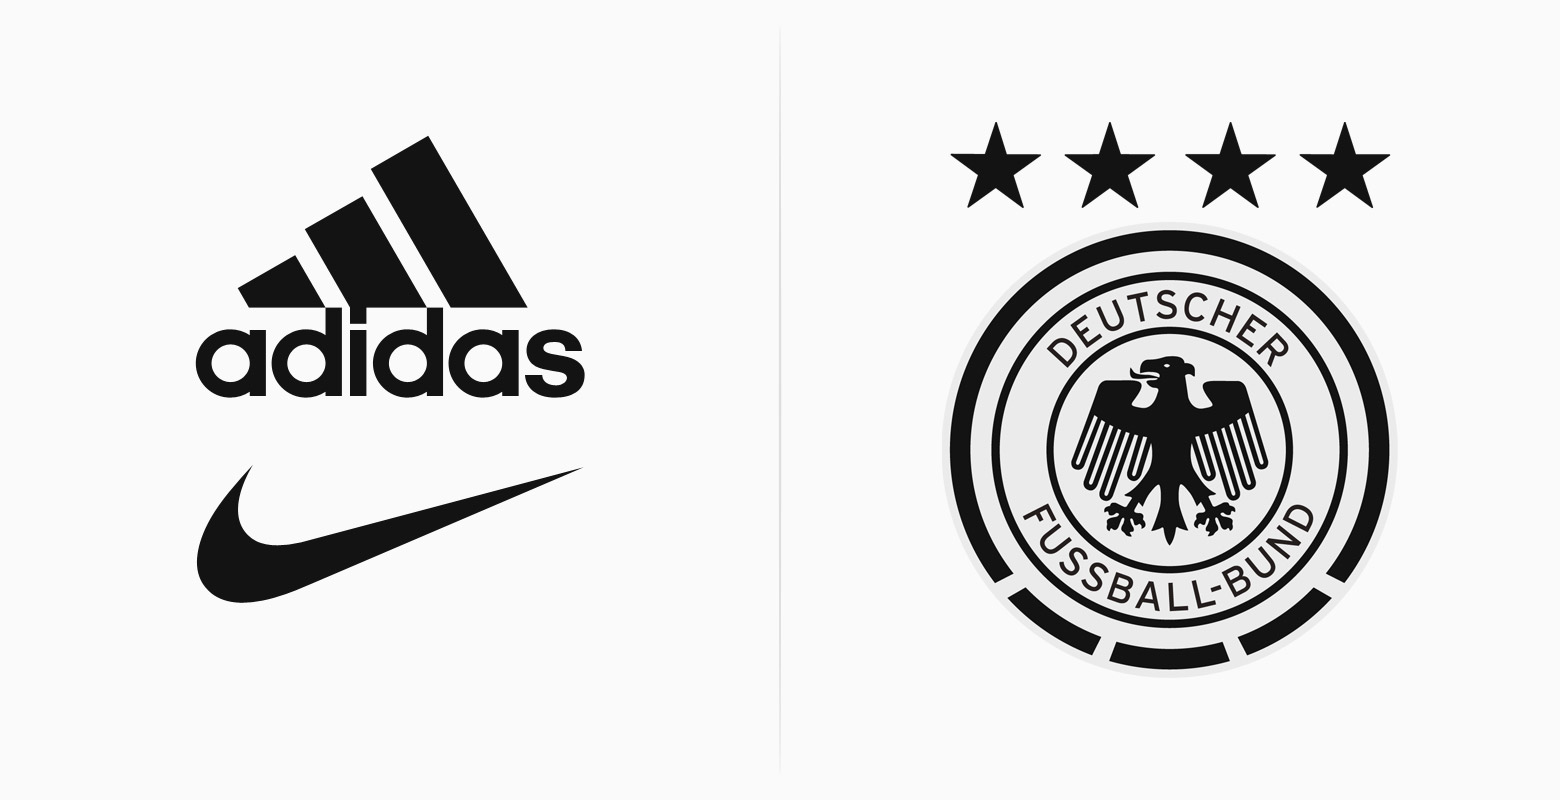 Germany to Sign Record-breaking €1 Billion Kit Deal - Footy